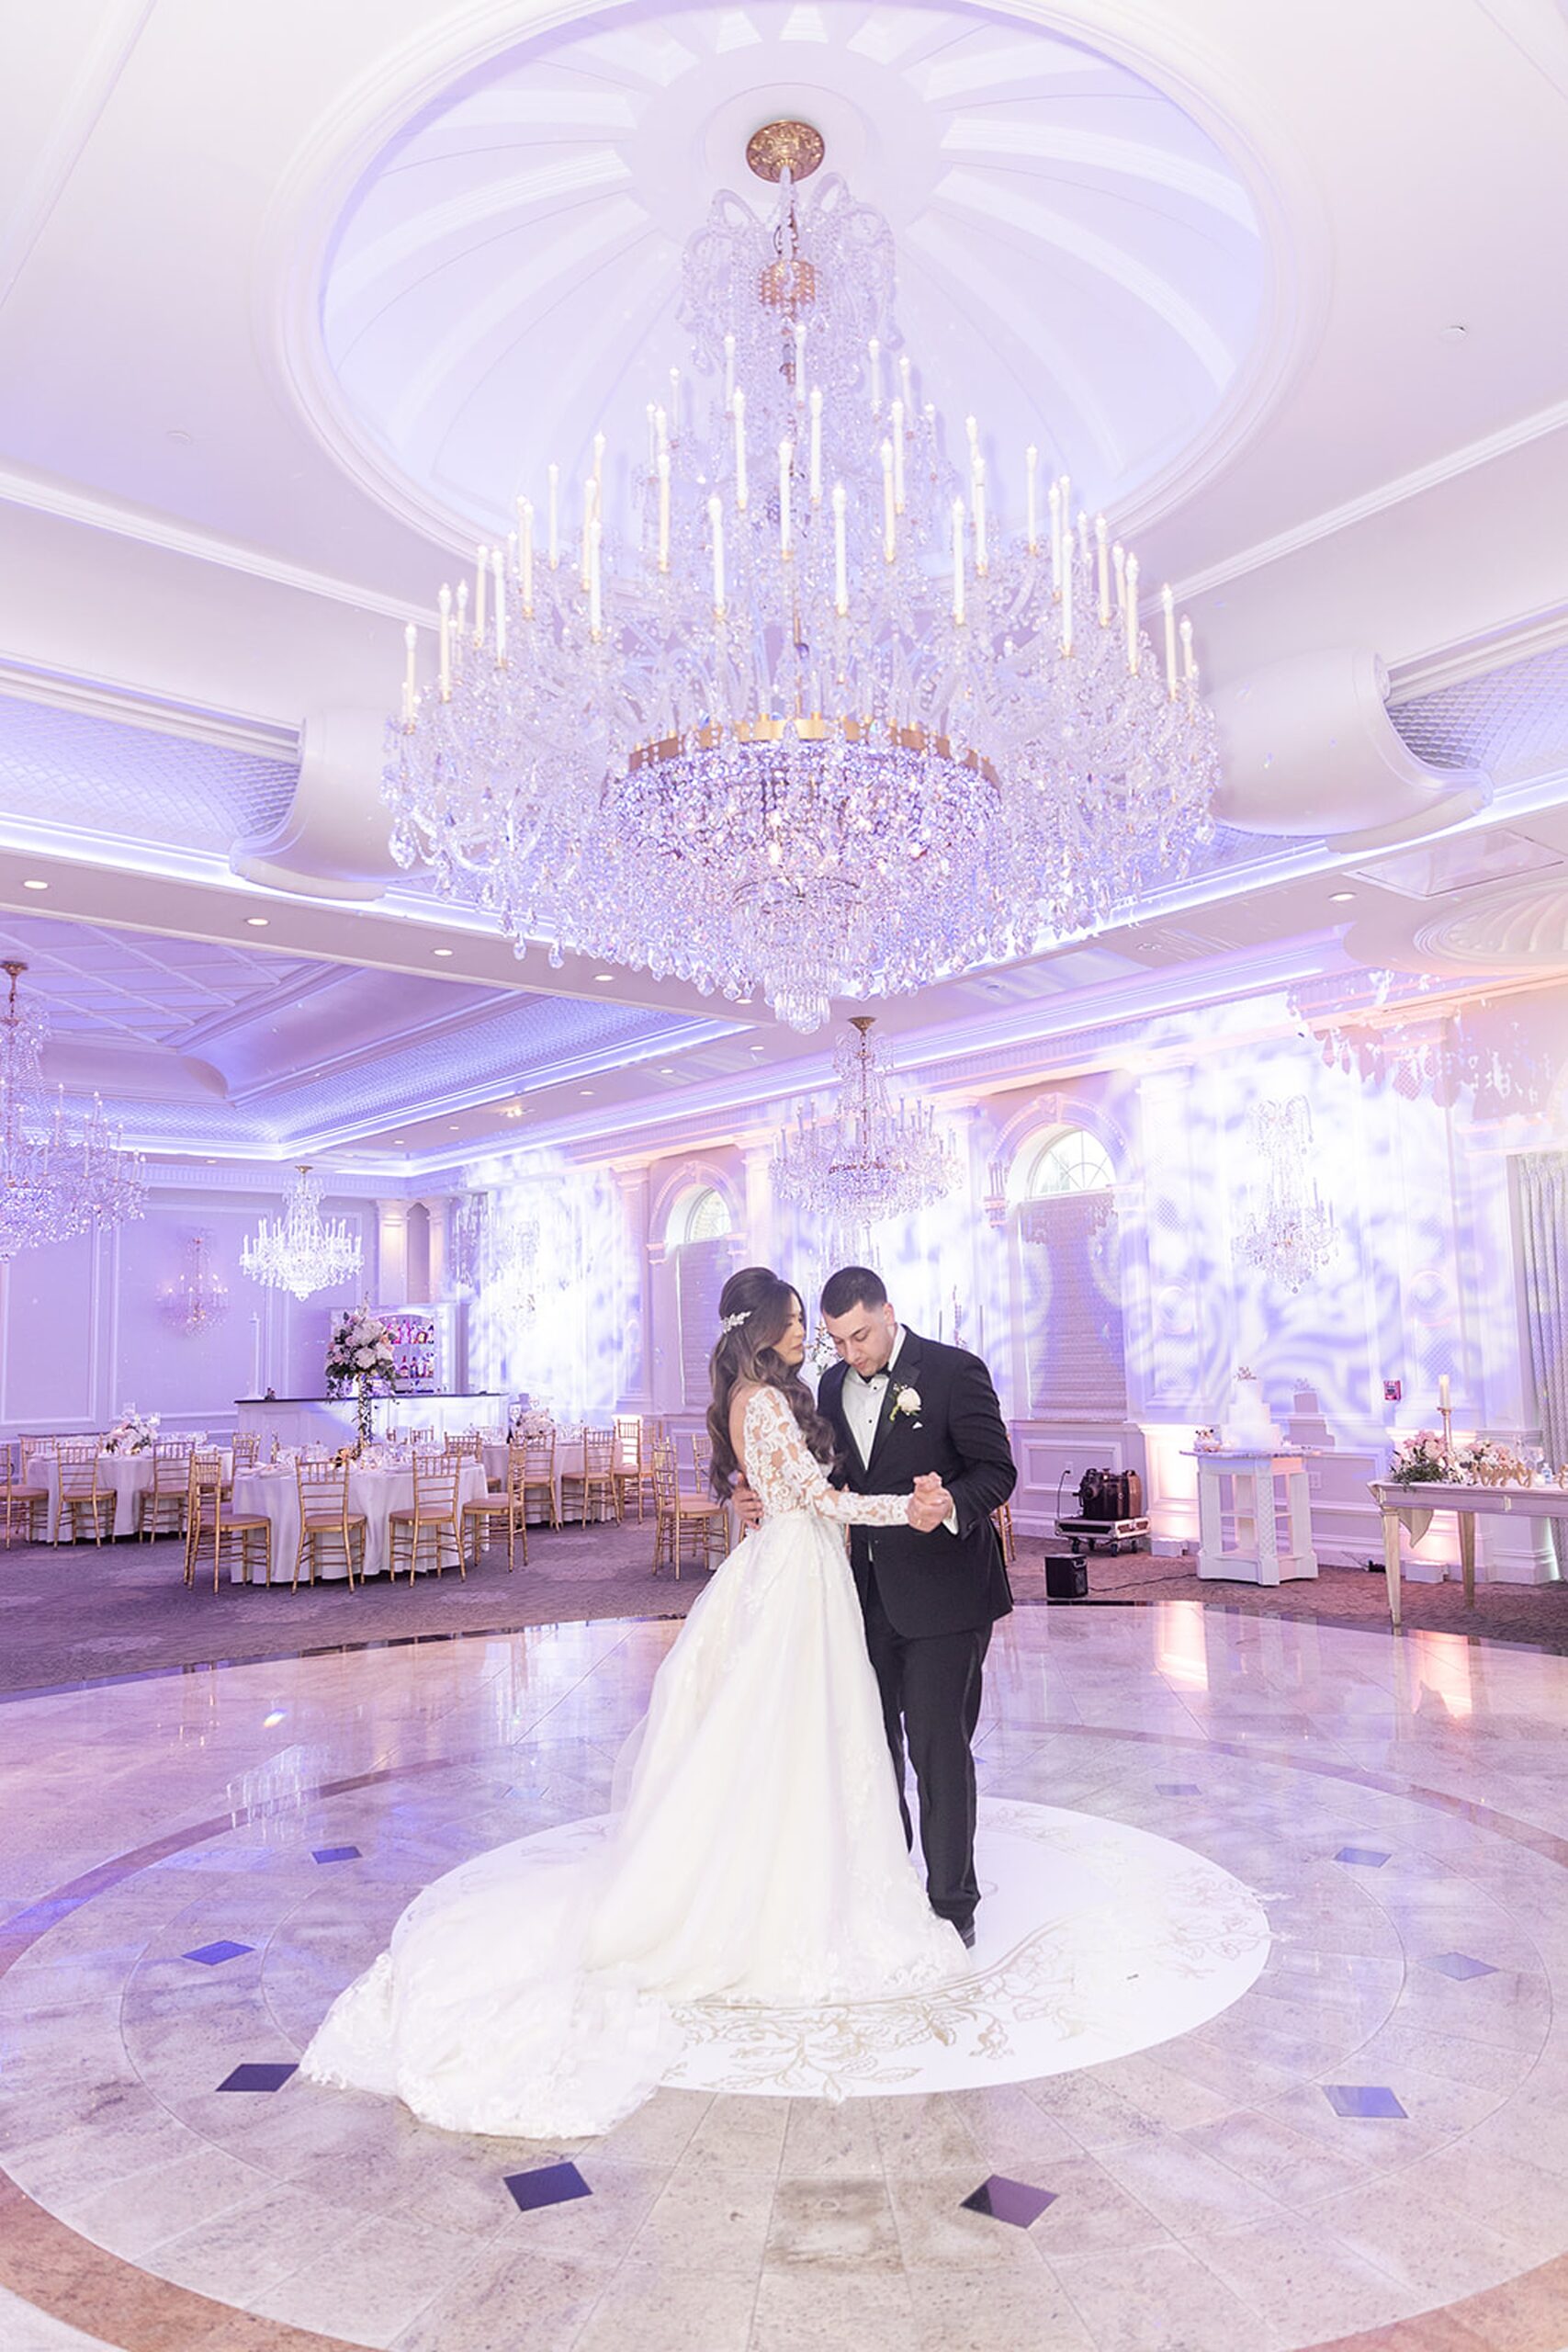 Newlyweds dance in an empty ballroom with large crystal chandeliers before their reception at the rockleigh wedding venue